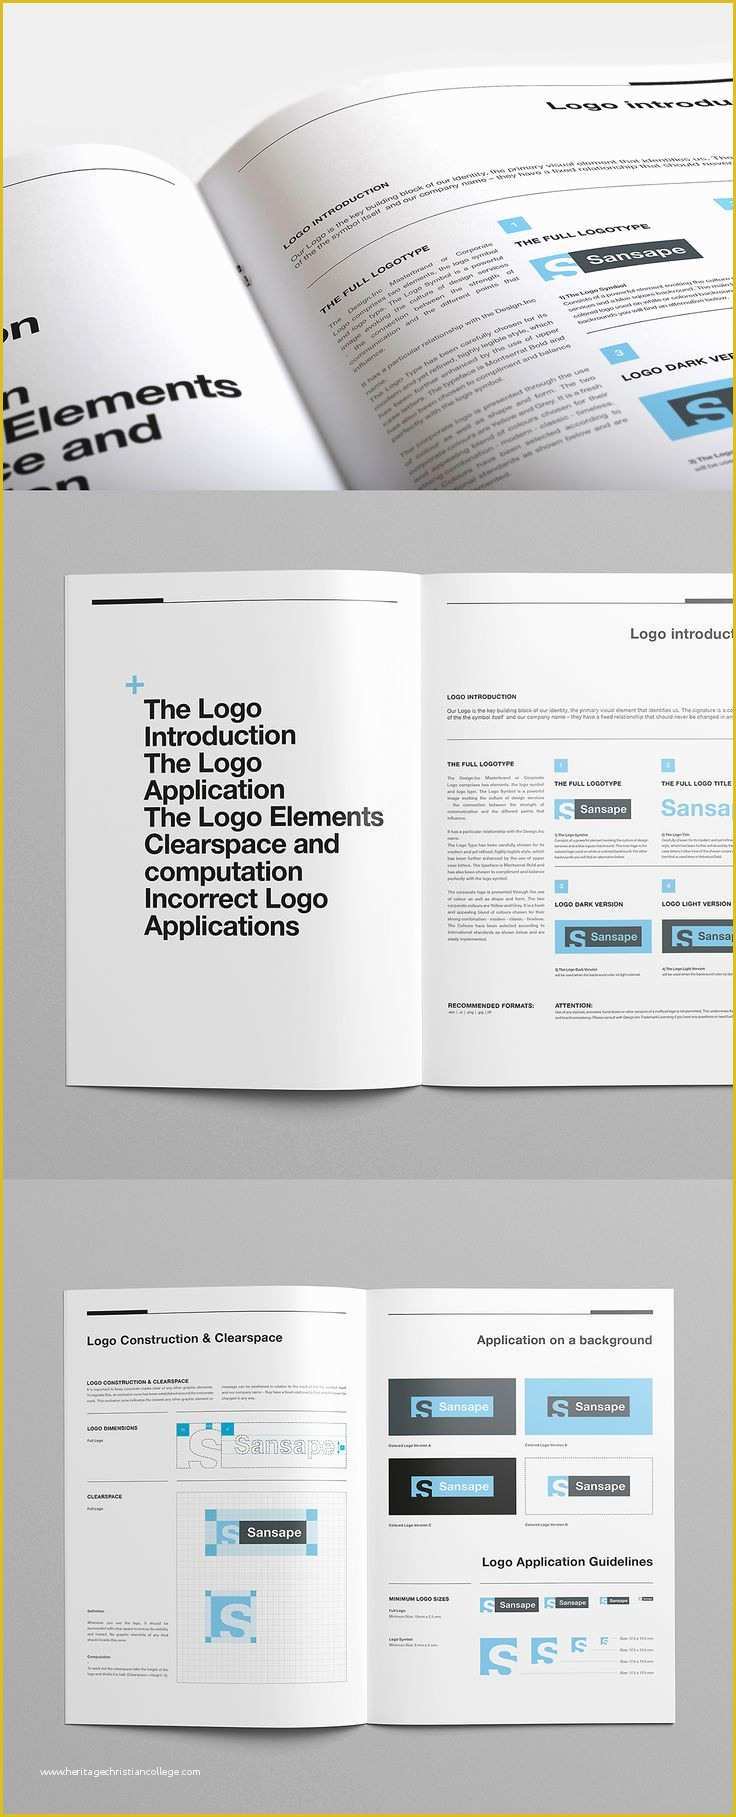 Brand Guidelines Template Indesign Free Of 25 Best Brand Guidelines Template Ideas On Pinterest